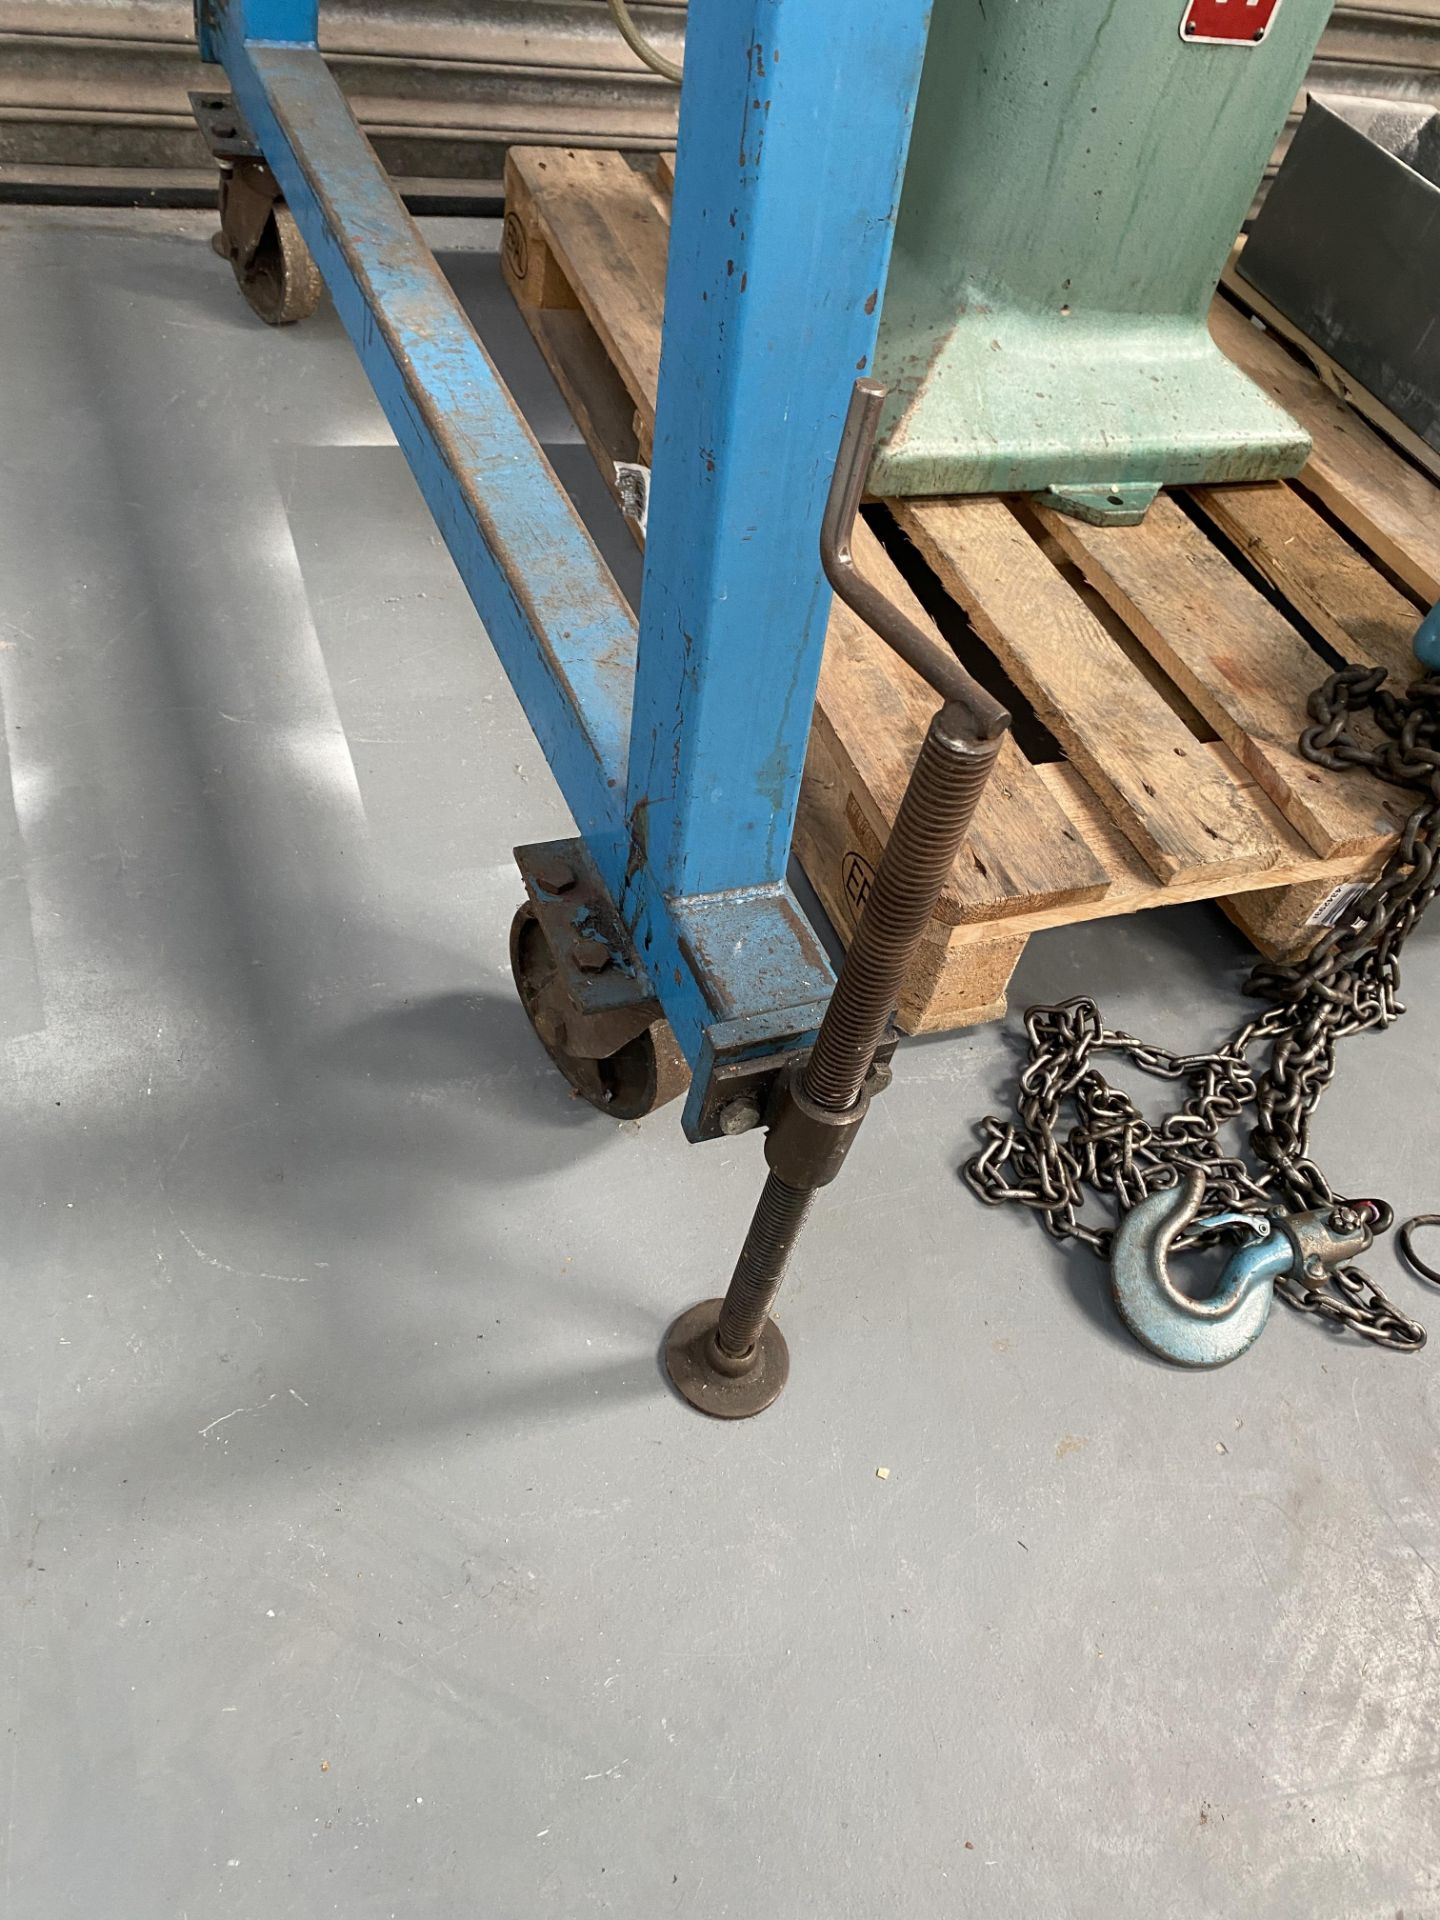 Watts Lifting Equipment, A Frame Lifting Gantry, SWL 2 Tons with chain hoist - Image 5 of 12